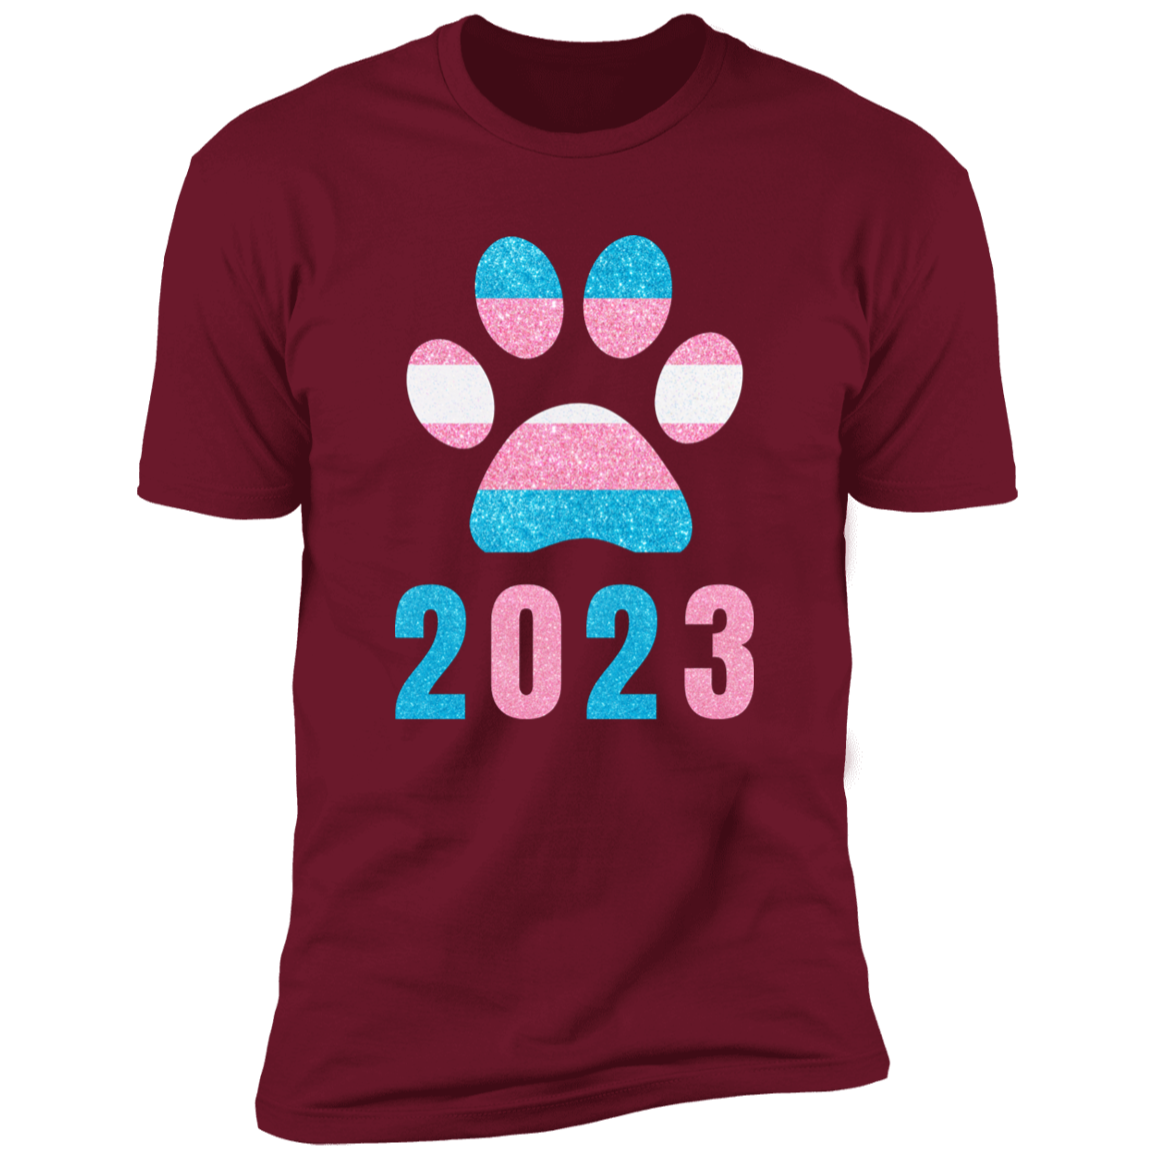 Dog Paw Trans Pride 2023 t-shirt, dog trans pride dog shirt for humans, in cardinal red